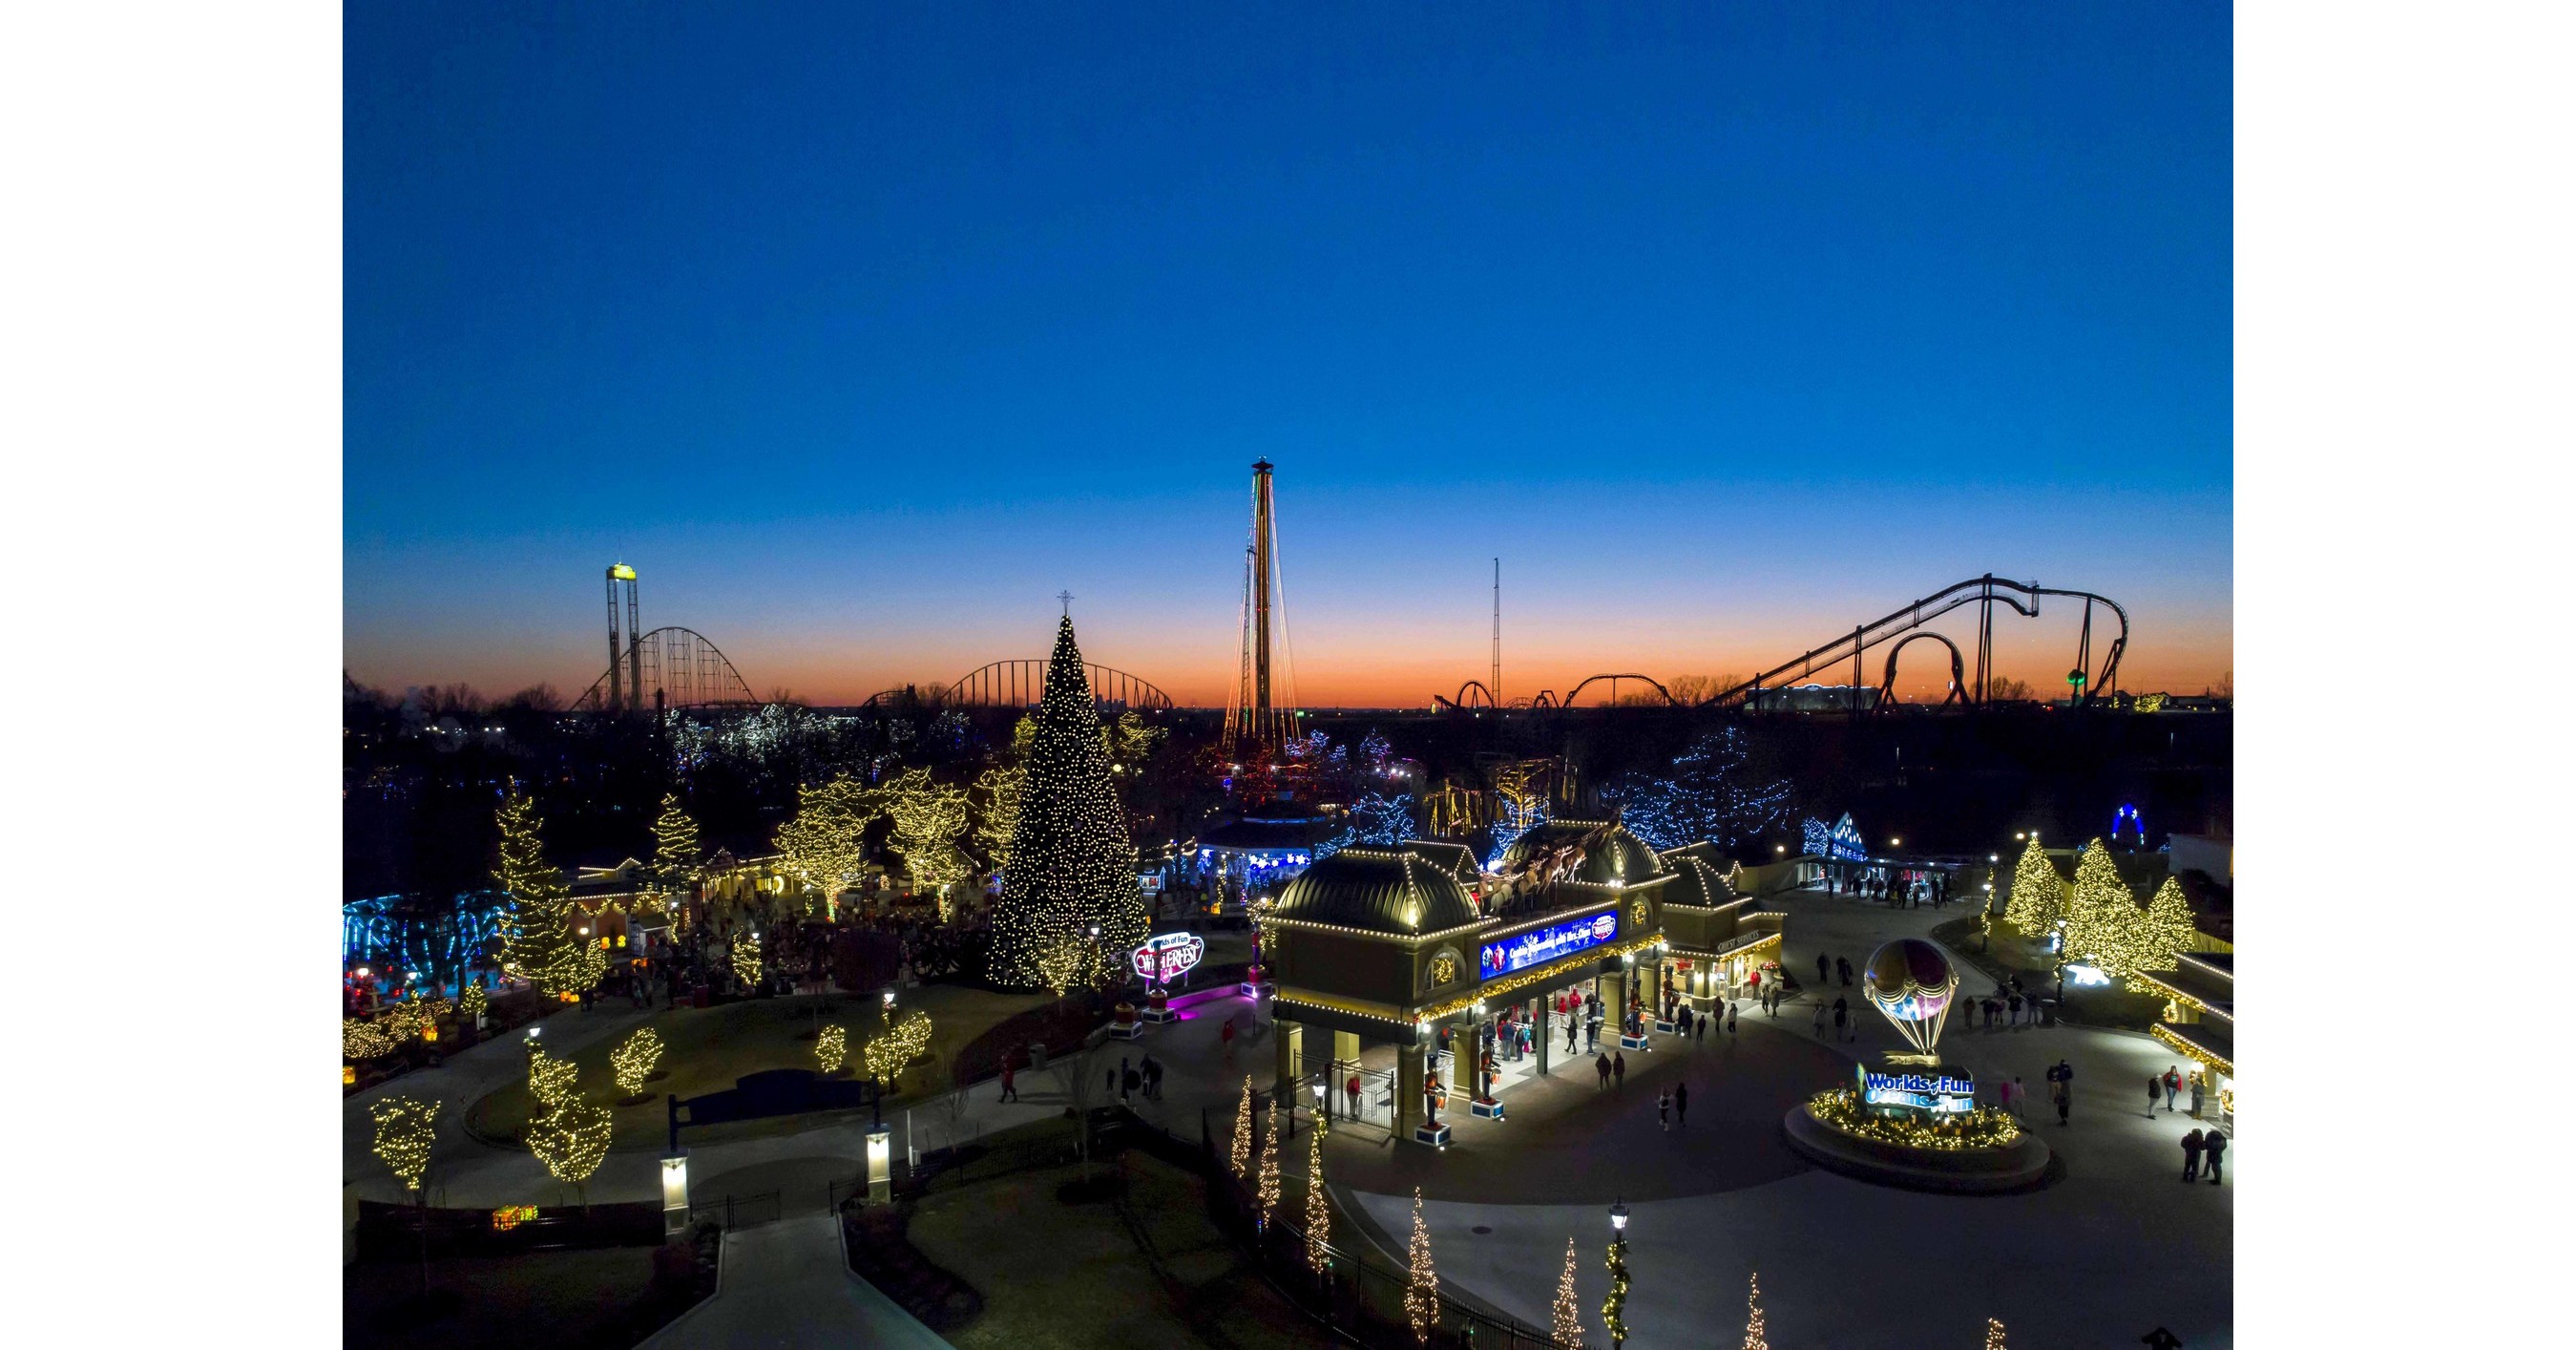 WinterFest Returns to Worlds of Fun with New Festive Features, New Year